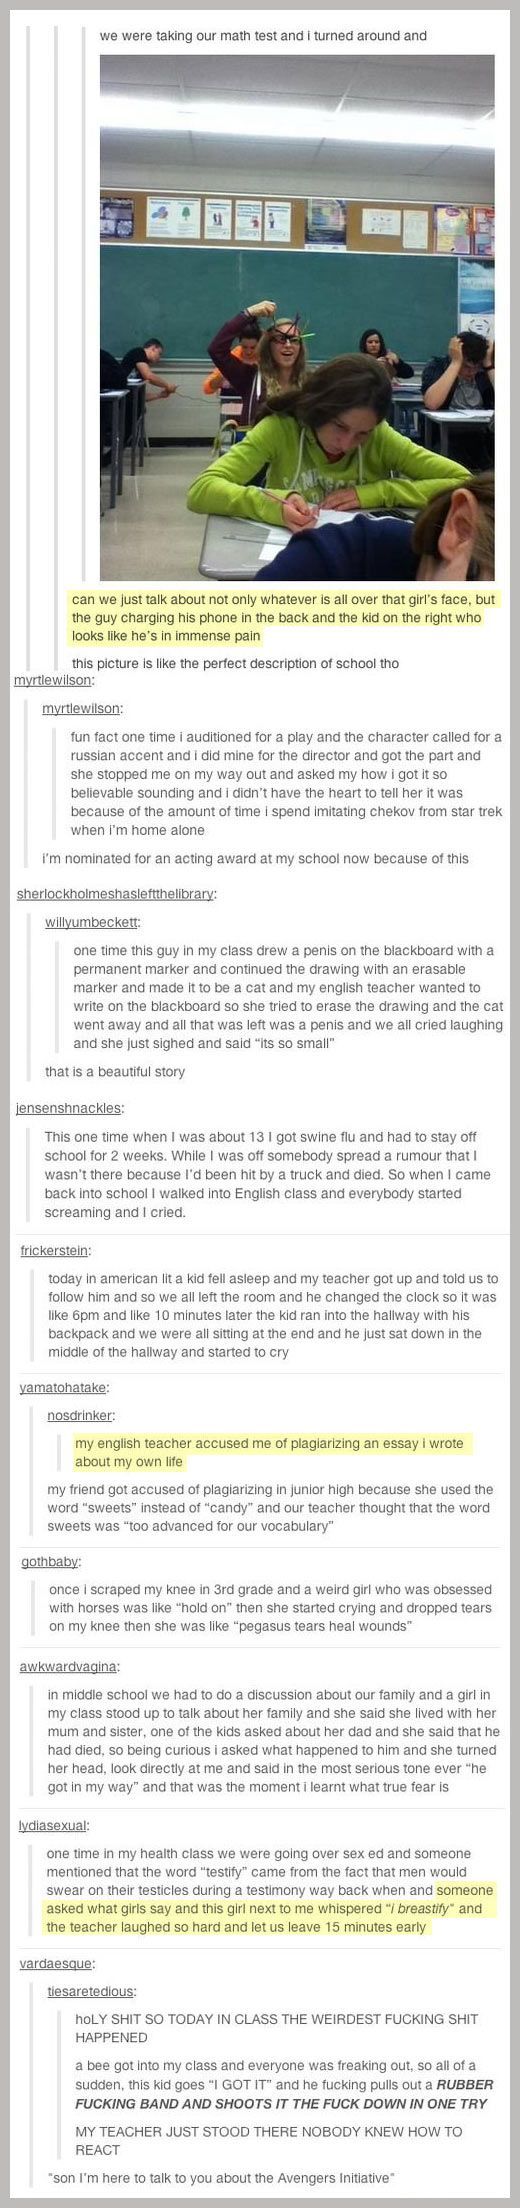 Some fun school things from Tumblr